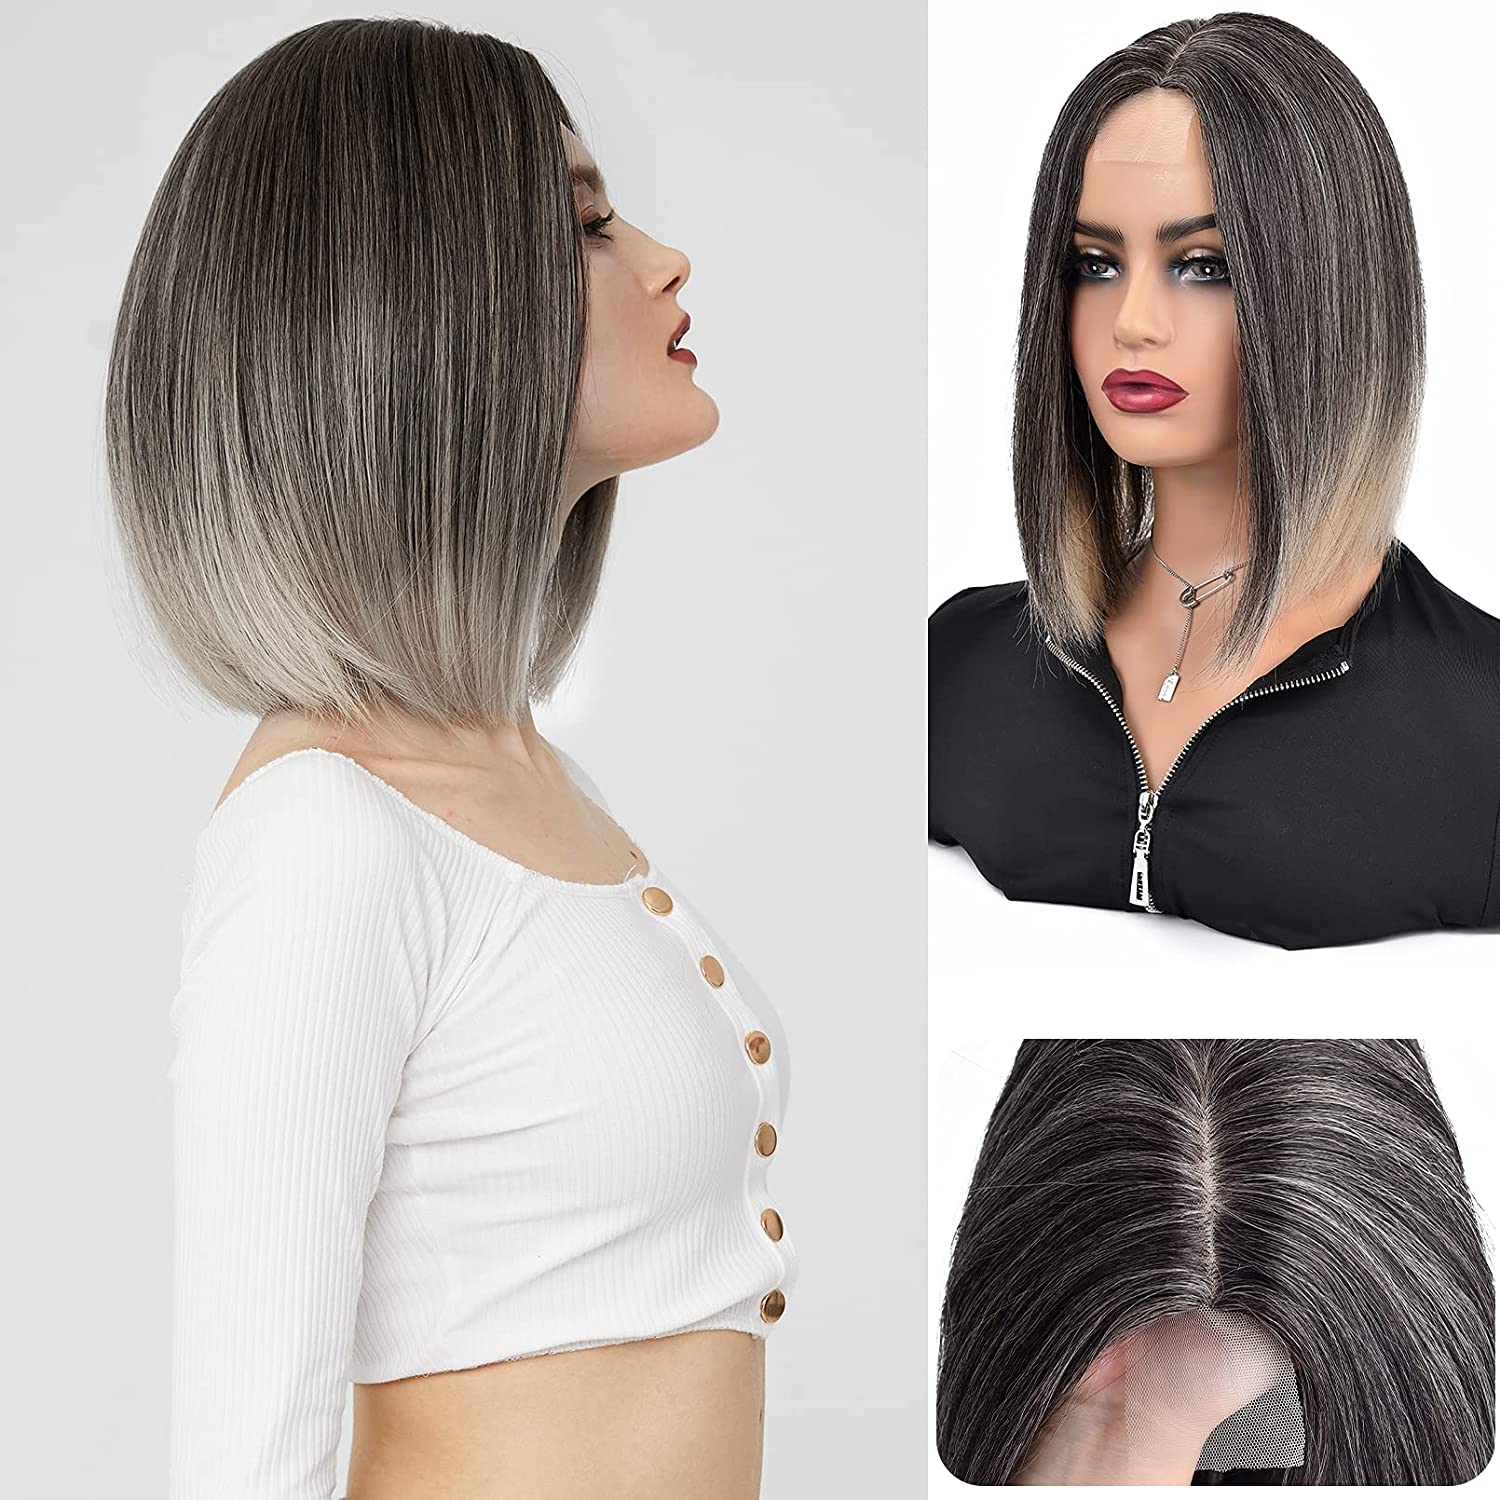 REECHO Synthetic Short Bob Wigs, Straight wigs Natural hairline Closure Wigs Pre Plucked with Natural Baby Hair